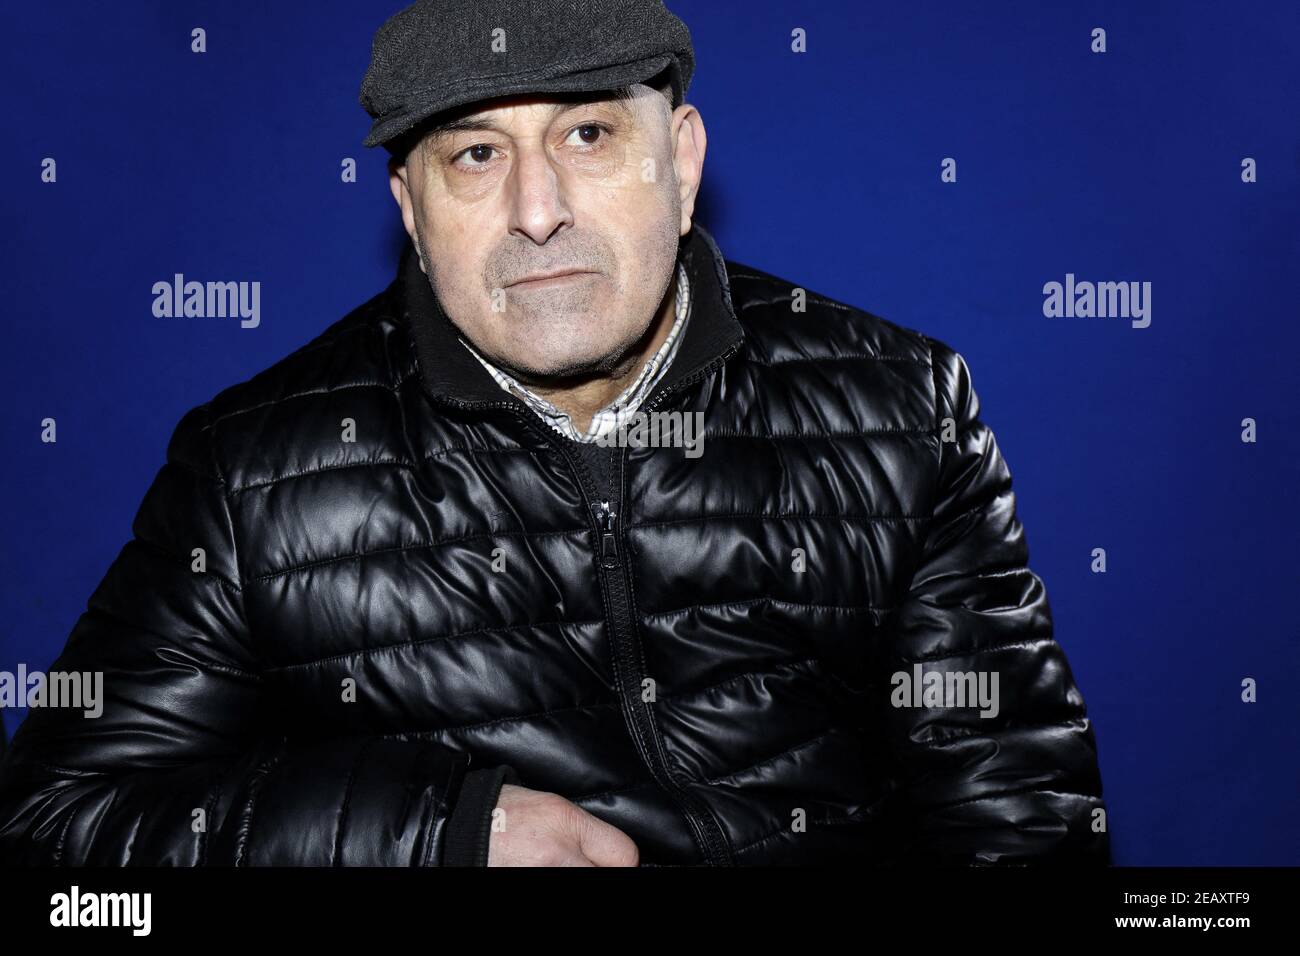 Paris, France. 09th Feb, 2021. Yunice Abbas, one of five men who robbed US media personality Kim Kardashian at her hotel in Paris in 2016, poses during a photo session for the release of his book on February 9, 2021 in Paris, France. After 22 months behind bars for the Kardashian heist, a judge released him on health grounds, and Abbas now hopes a jury will be lenient after he underwent heart surgery. Photo by Vim/ABACAPRESS.COM Credit: Abaca Press/Alamy Live News Stock Photo